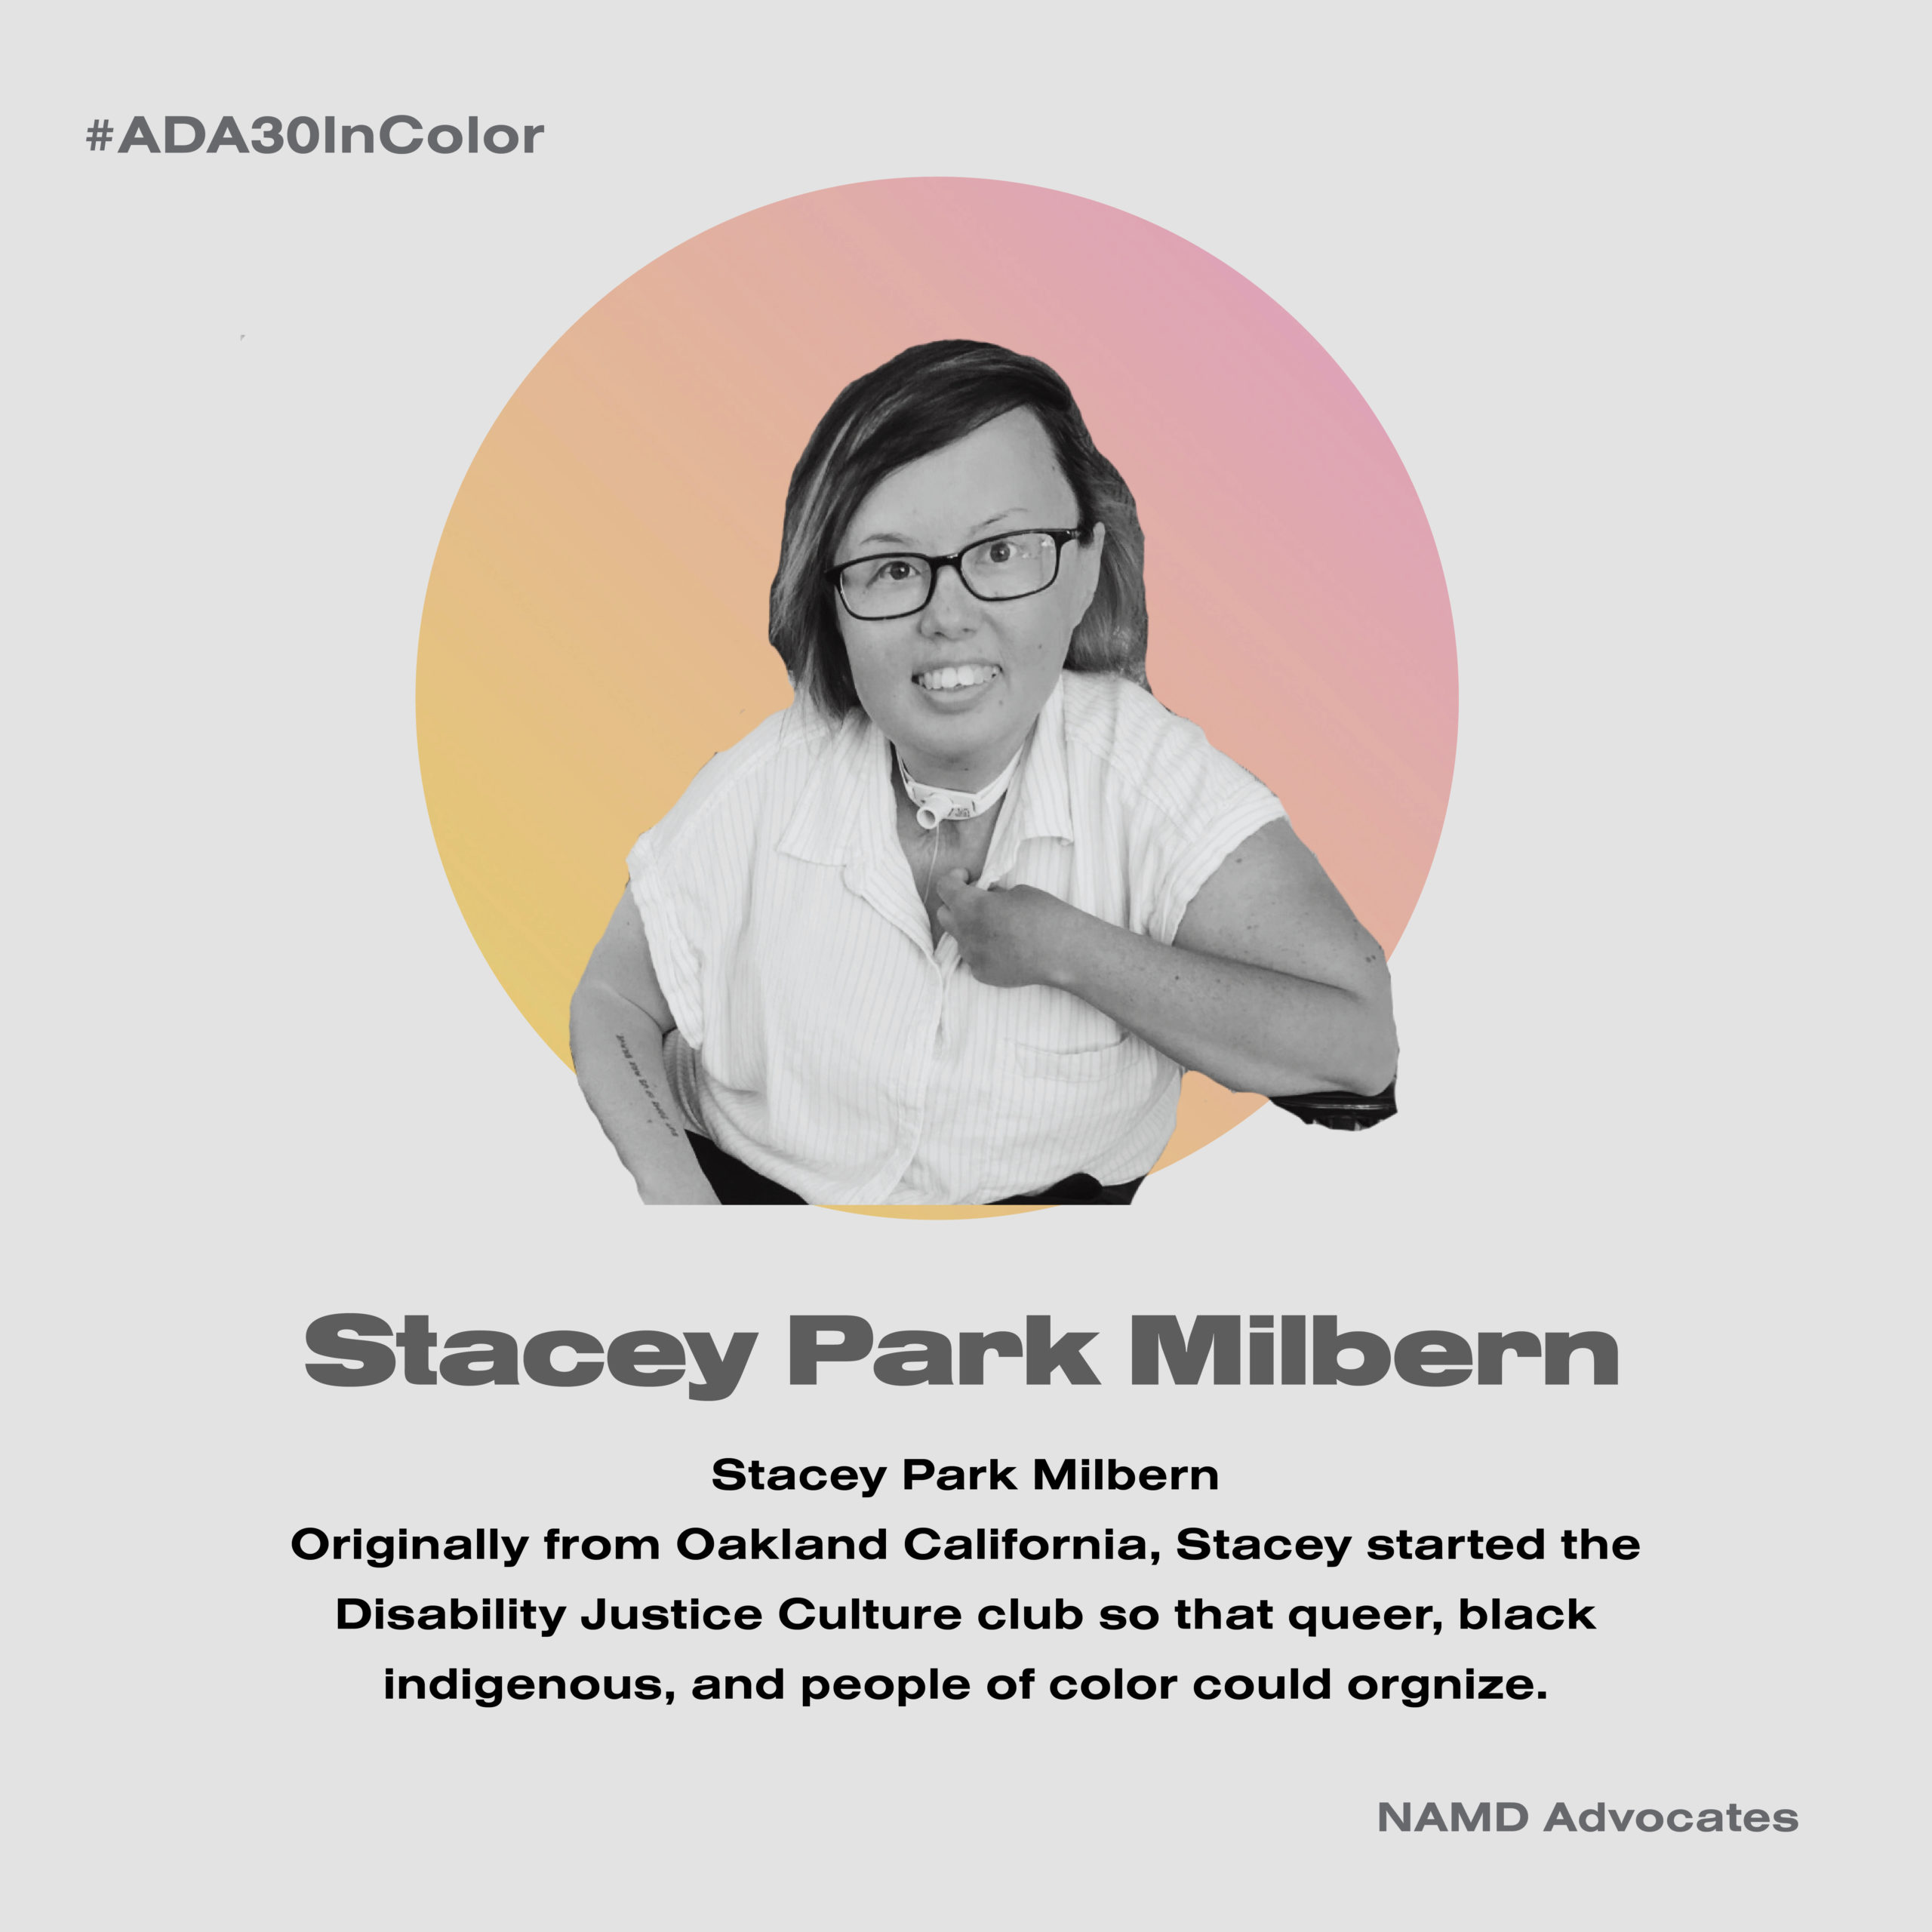 Stacey Park Milbern. Originally from Oakland California, Stacey started the Disability Justice Culture club so that queer, black indigenous, and people of color could organize..